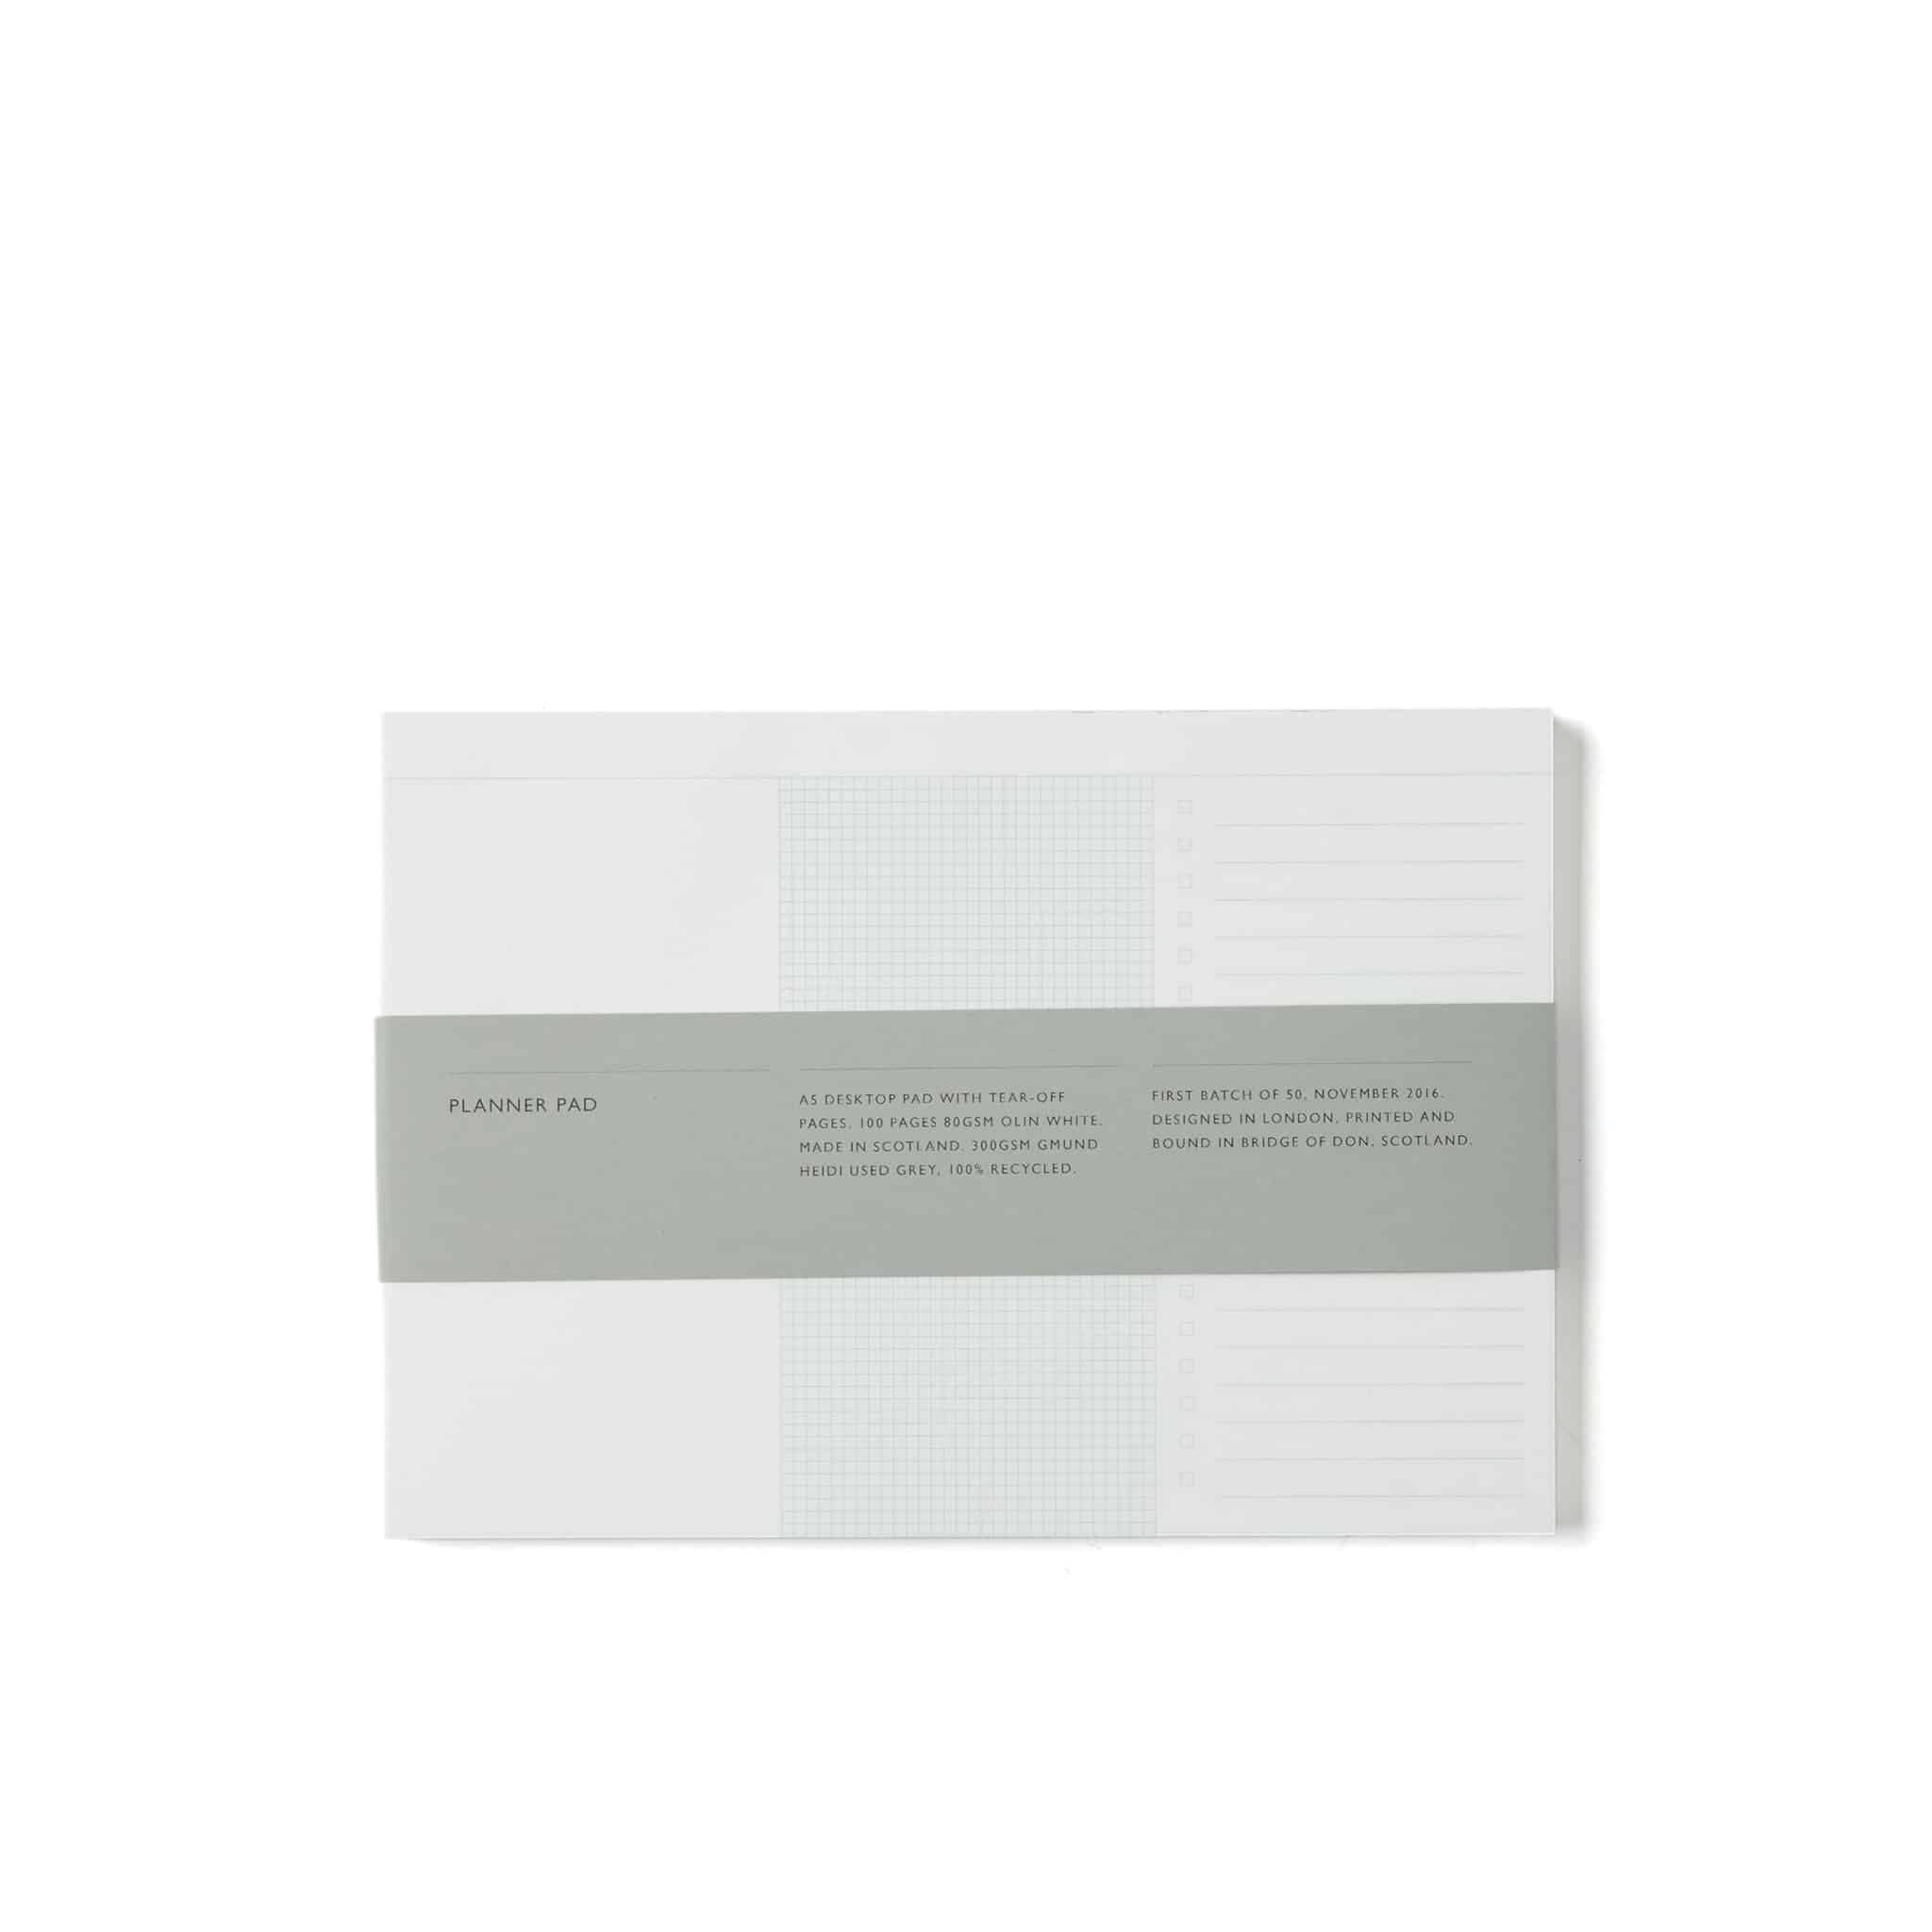 Planner Pad by Mark + Fold